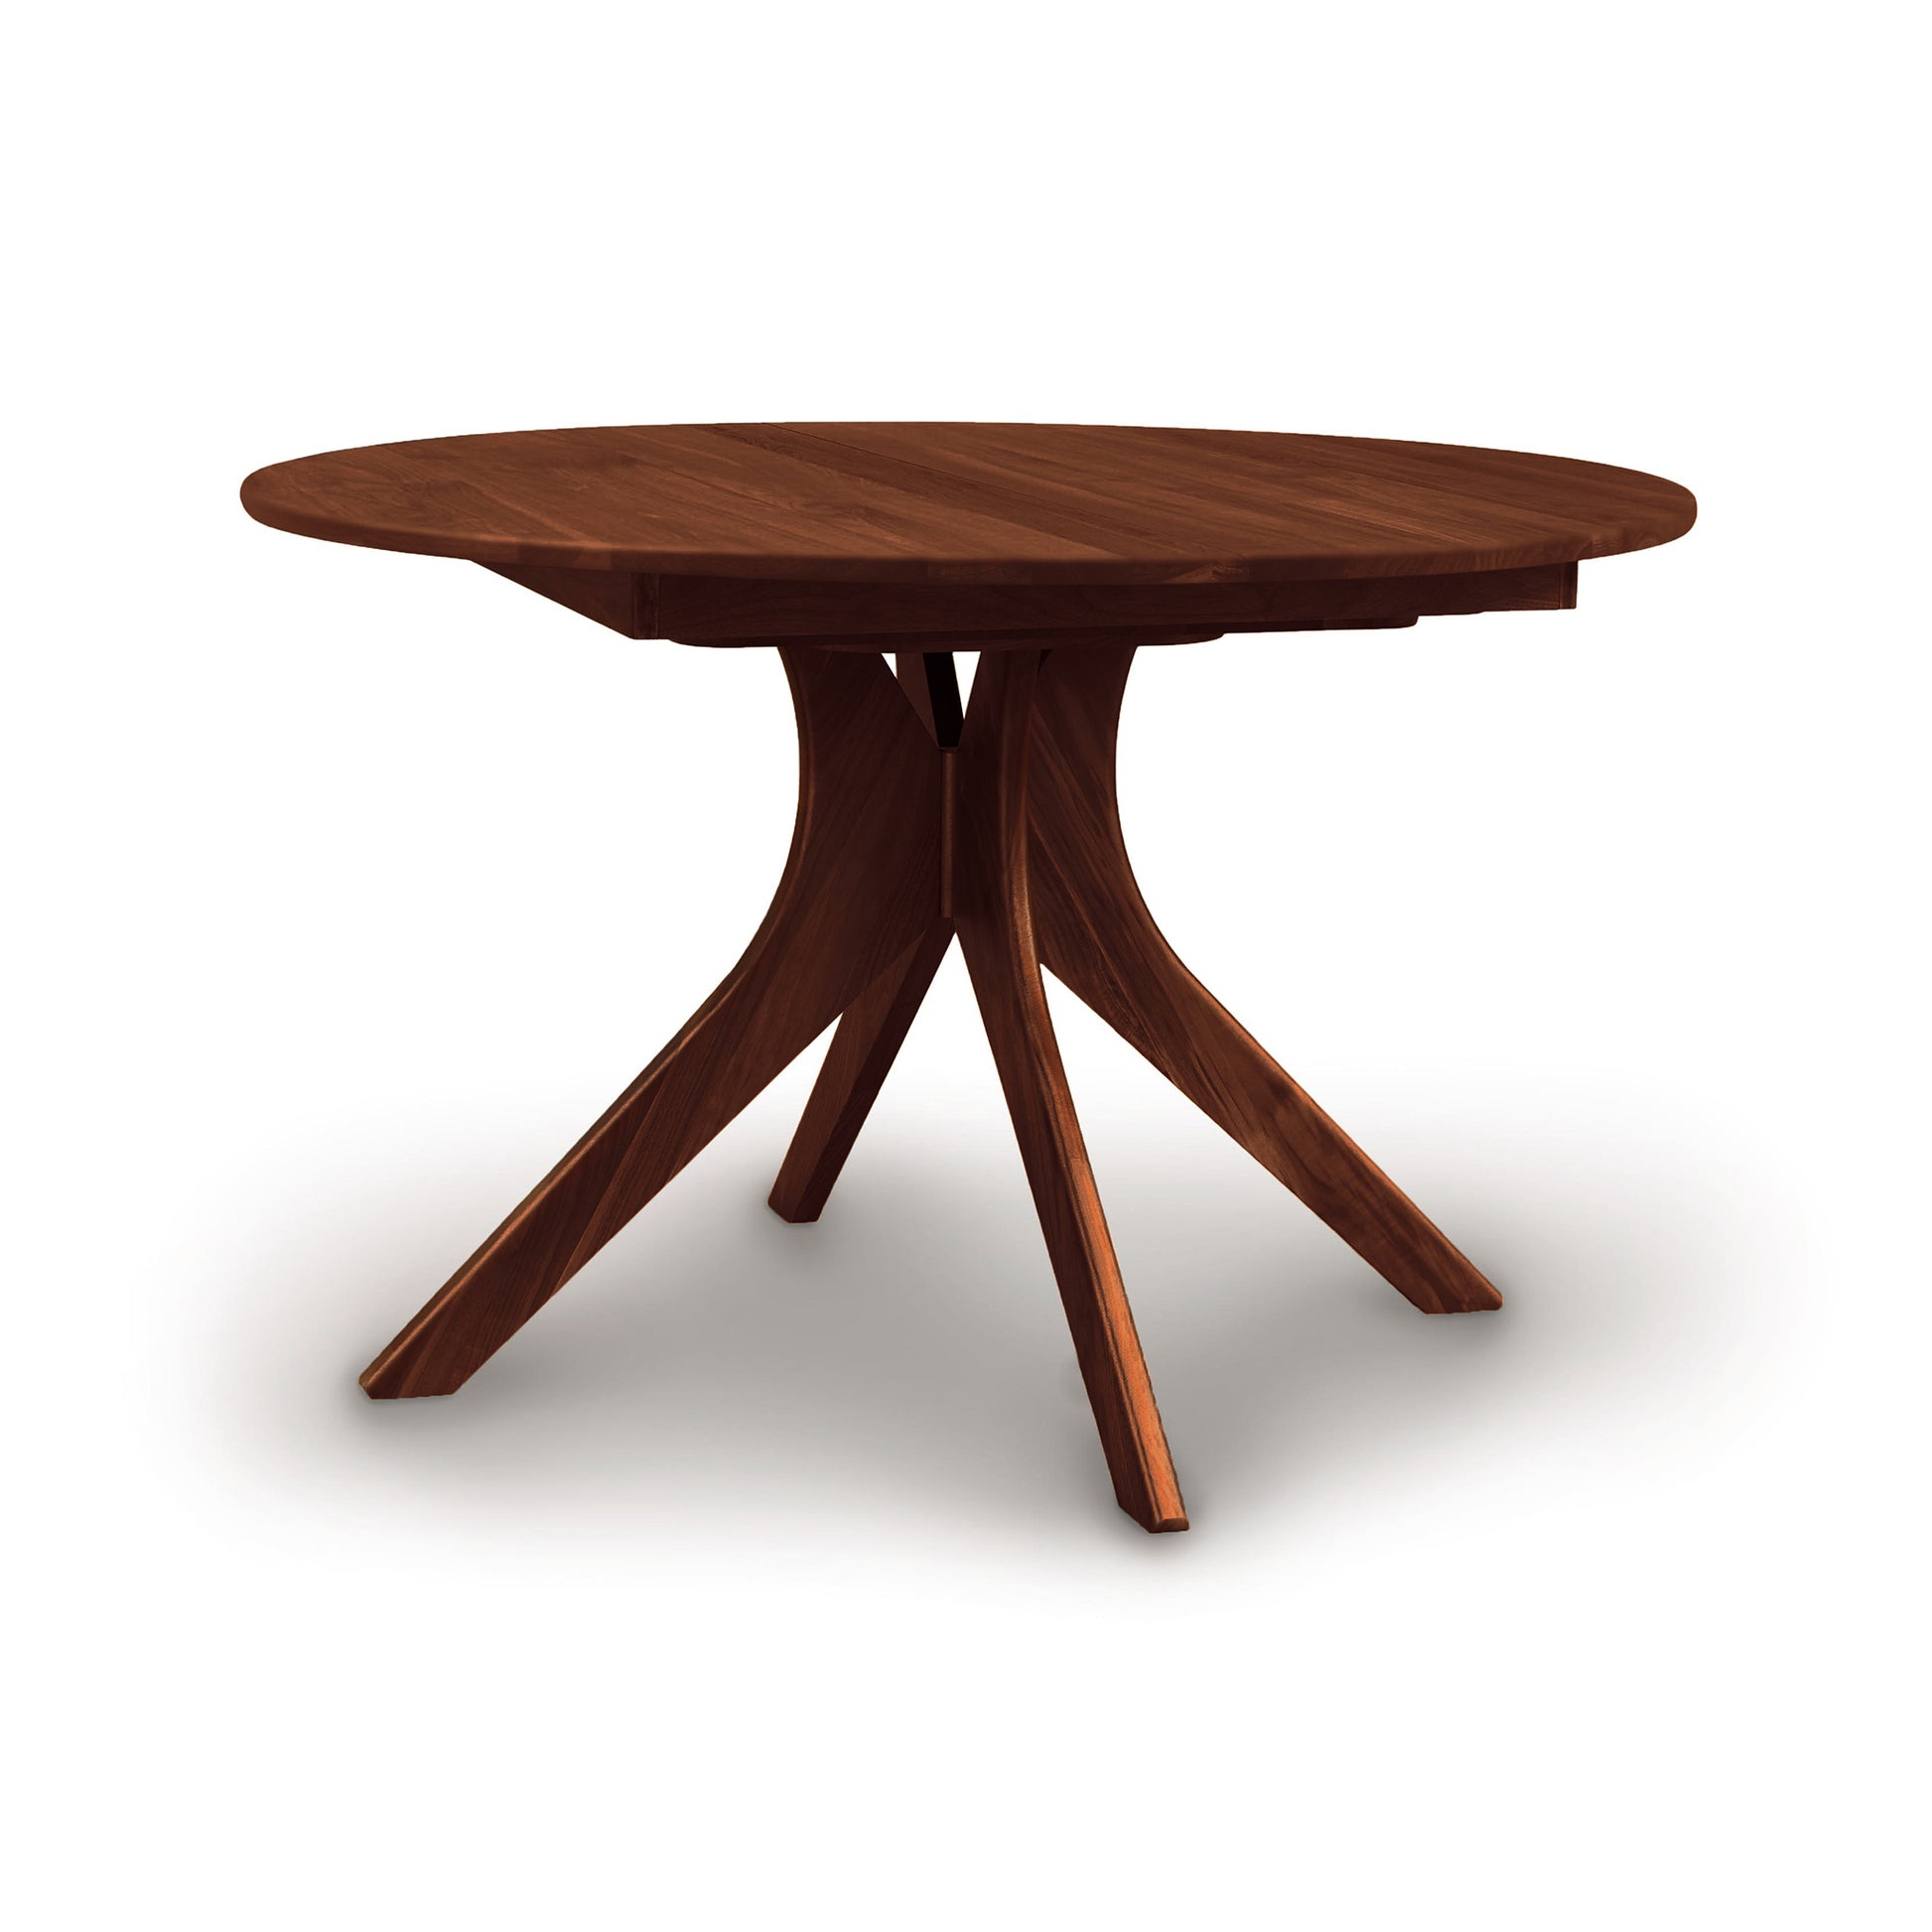 An Audrey Round Extension Dining Table from Copeland Furniture with three legs on a white background.